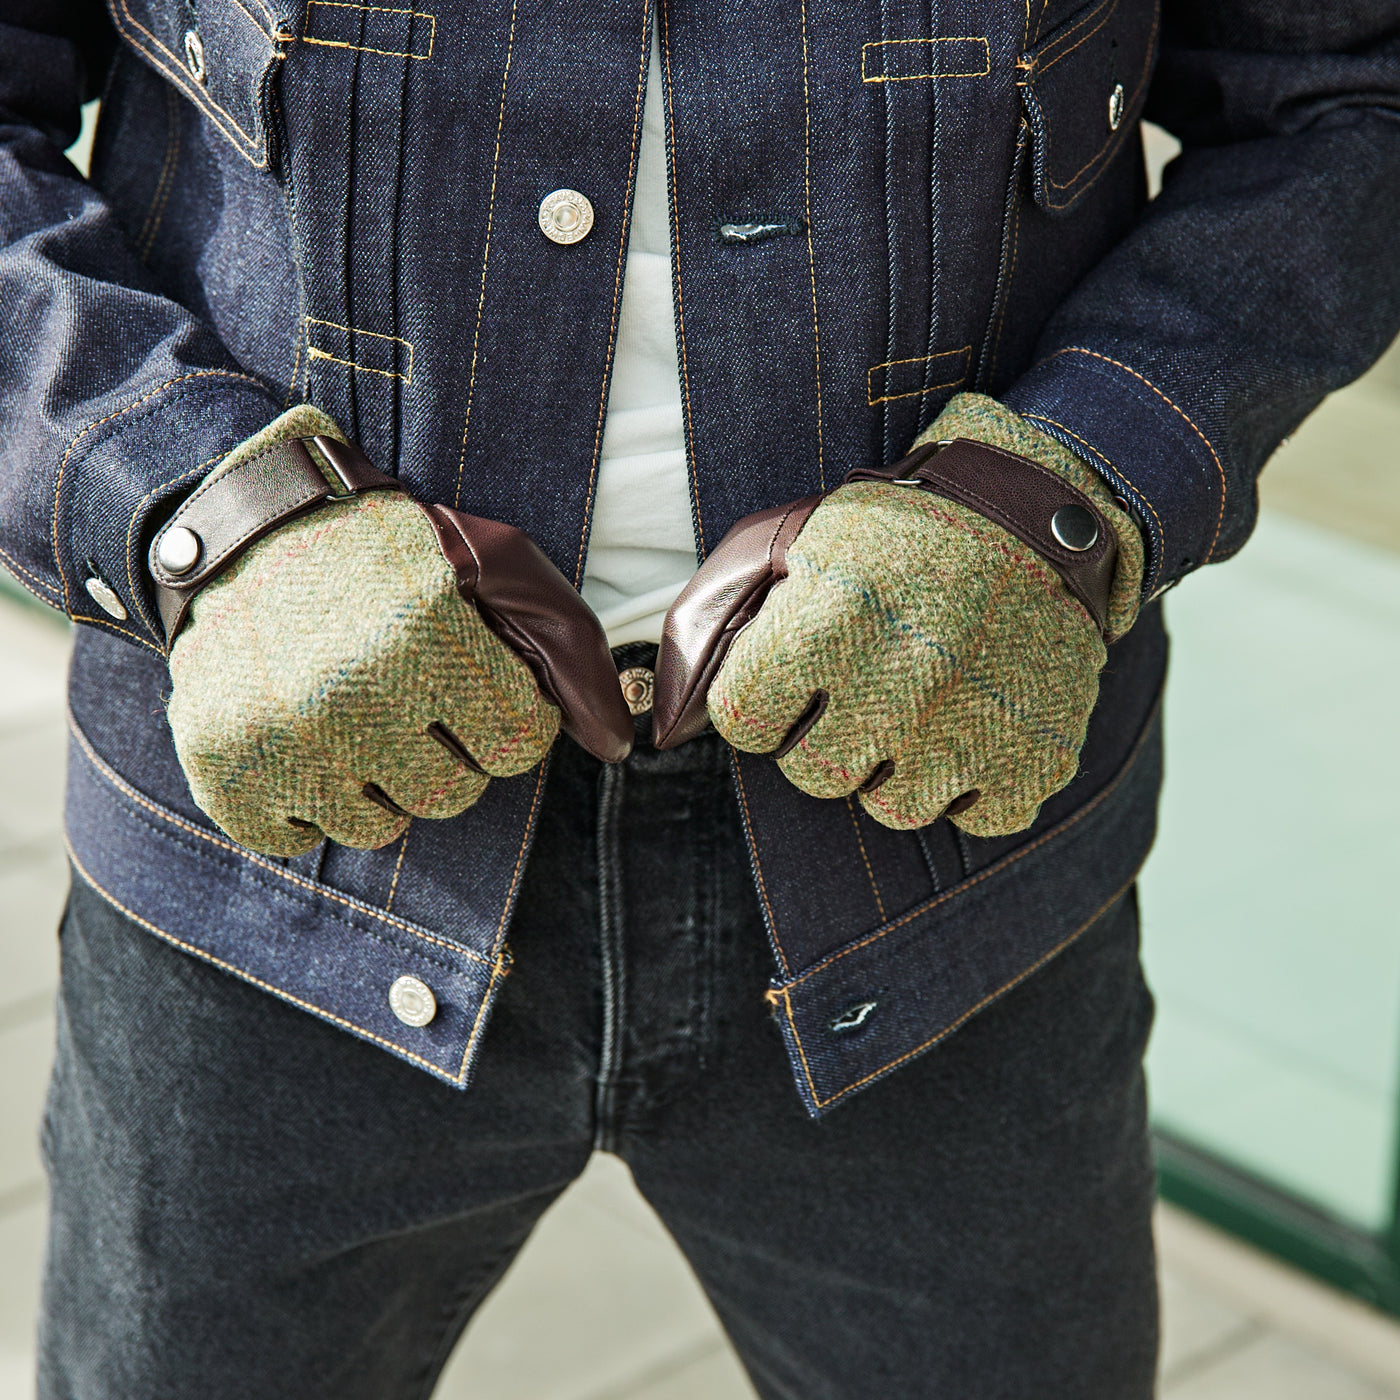 MJM GLOVES KYLE LEATHER/WOOL GREEN